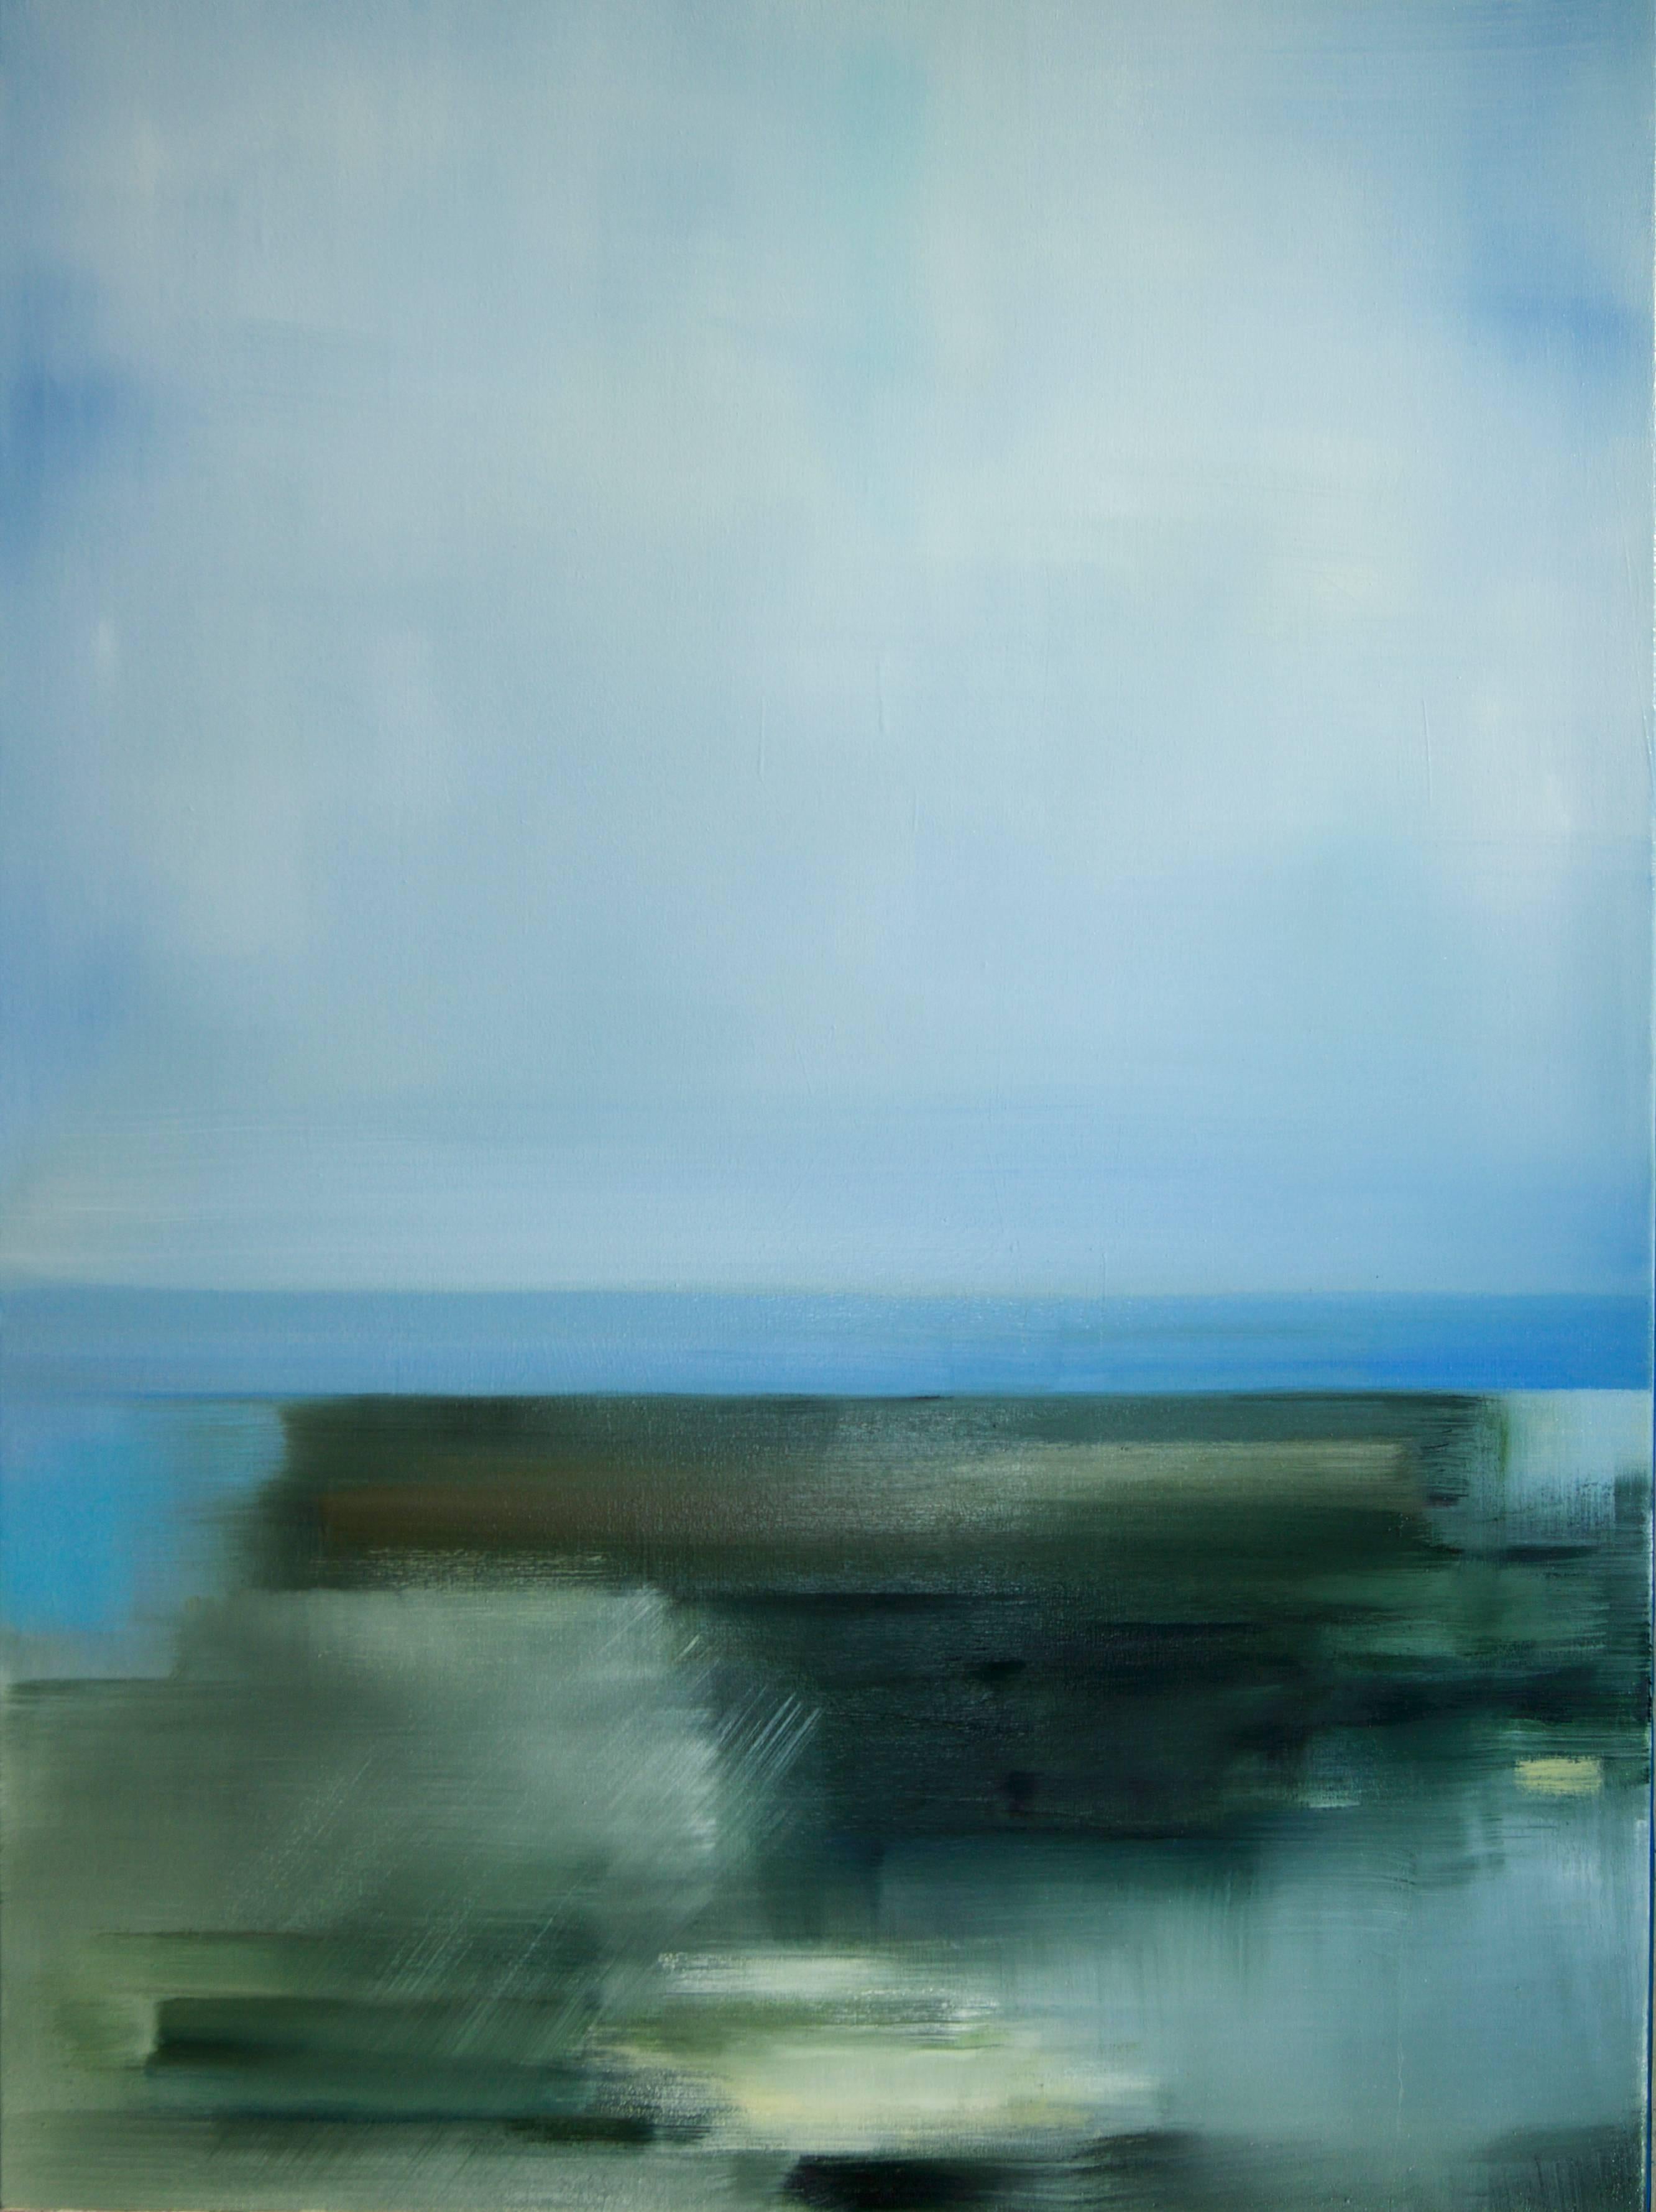 Liz Dexheimer
Domain Interchange Dune II, 2016
oil on canvas
54 x 40 in.

This original oil painting on canvas by Liz Dexheimer features thick painterly swathes of paint in bright shades of blue and green.

"I build my images with translucent color,